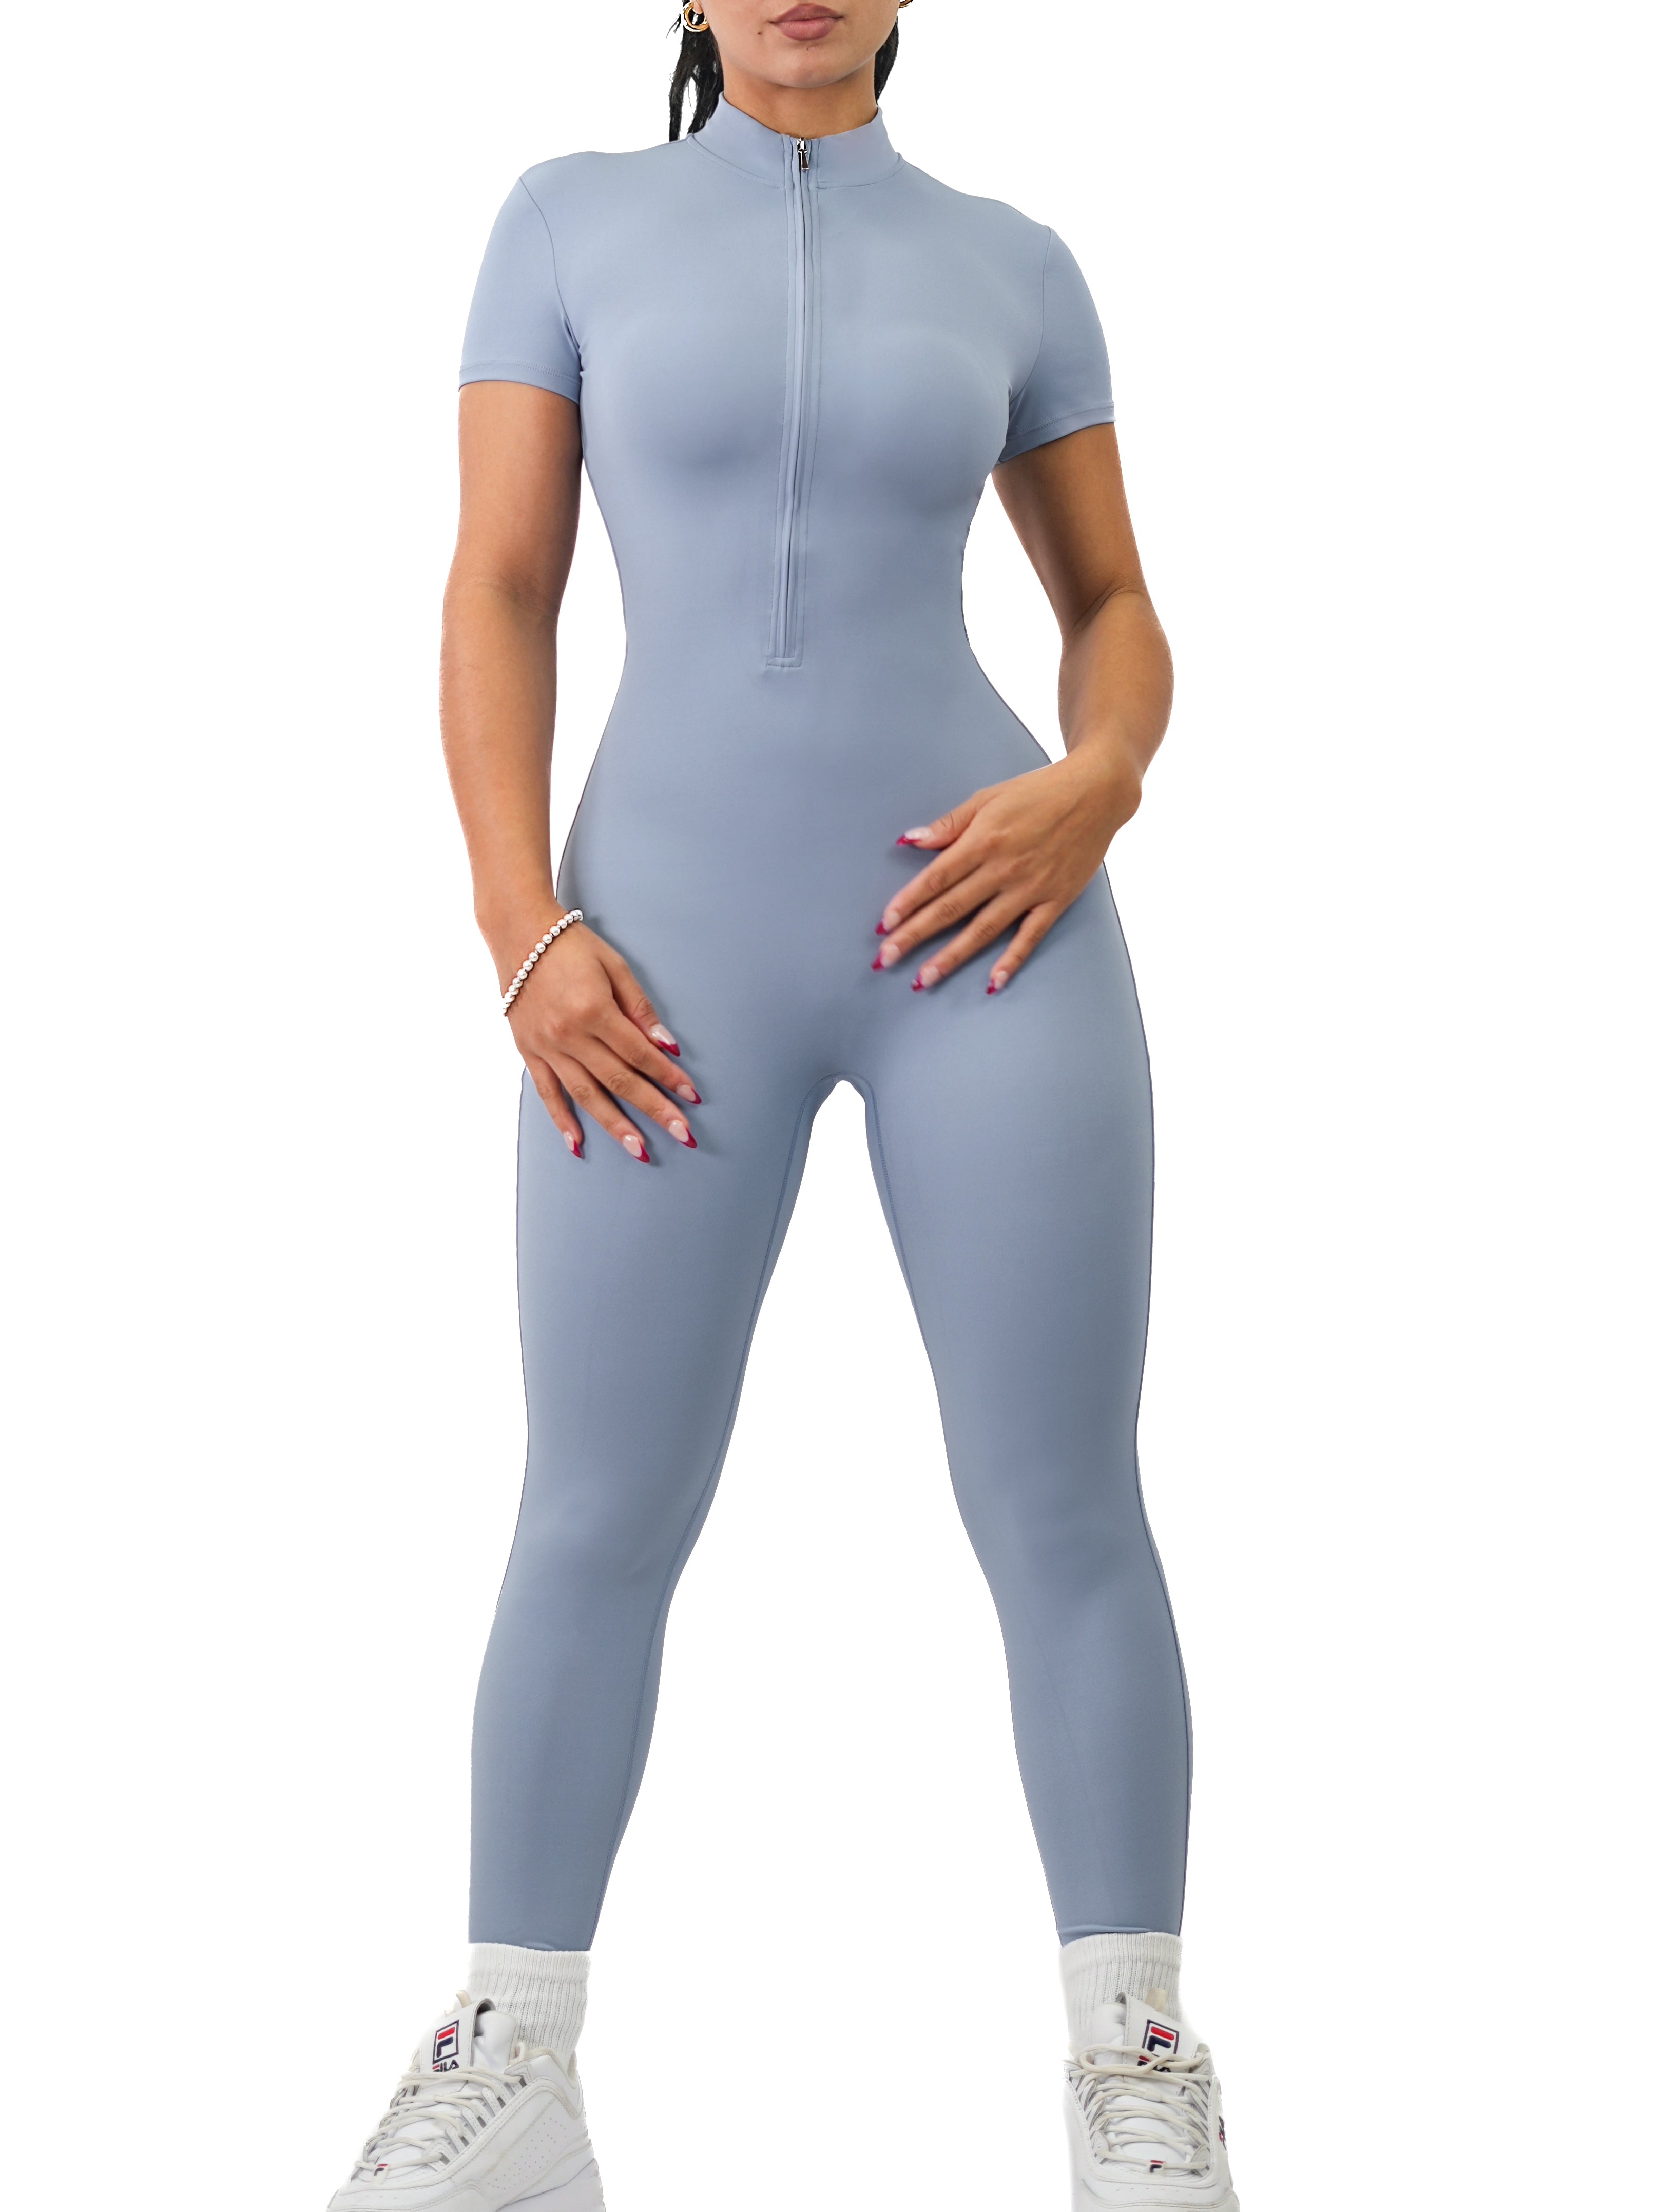 Fitted Zipper Jumpsuit (Stormy Blue)